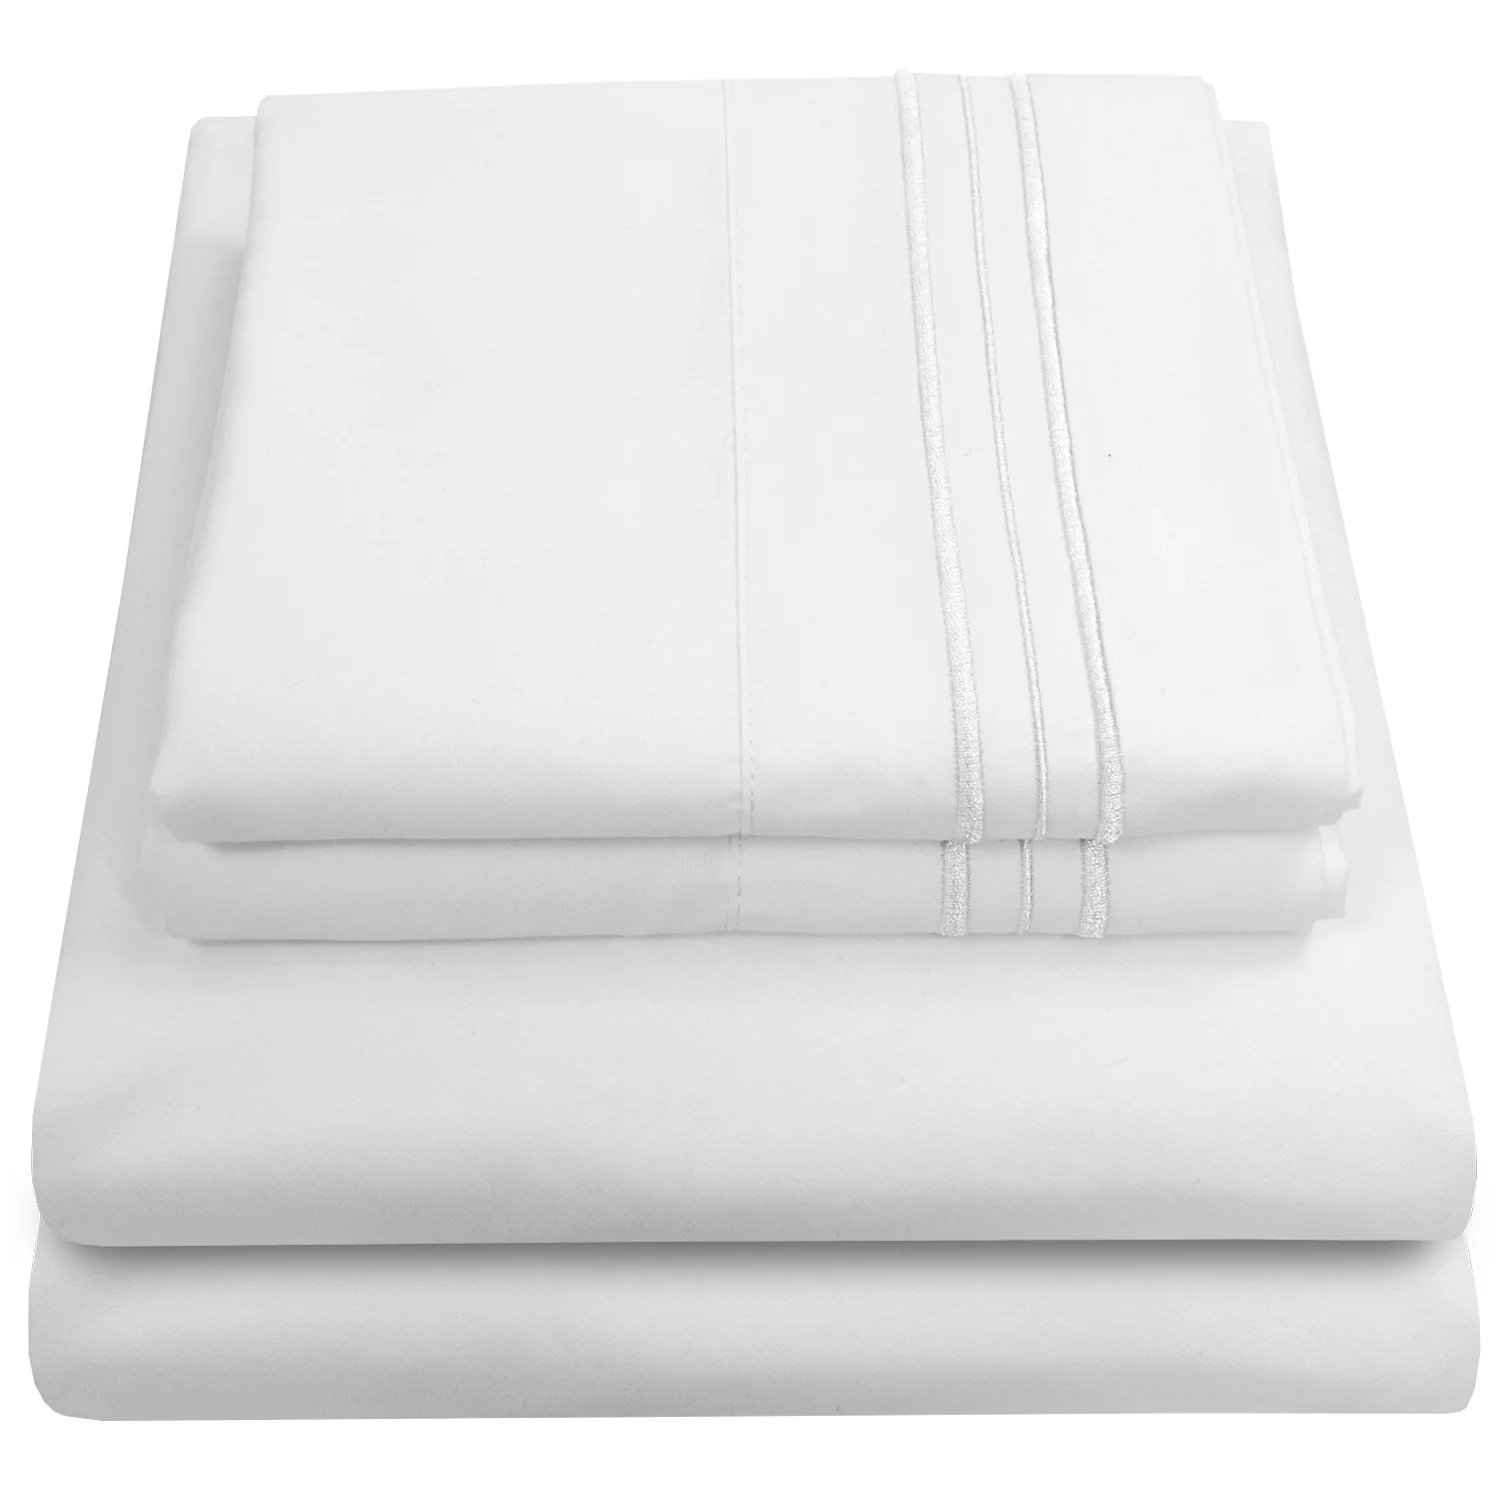 Sweet-Home-Collection-1500-Series-Bed-Sheets-Extra-Soft-Microfiber-Deep-Pocket-Sheet-Set-Queen-White_cead1c13-17d6-40e6-93ce-ae9b3267c911.86a87b1854f352f8fc82d805838edd35